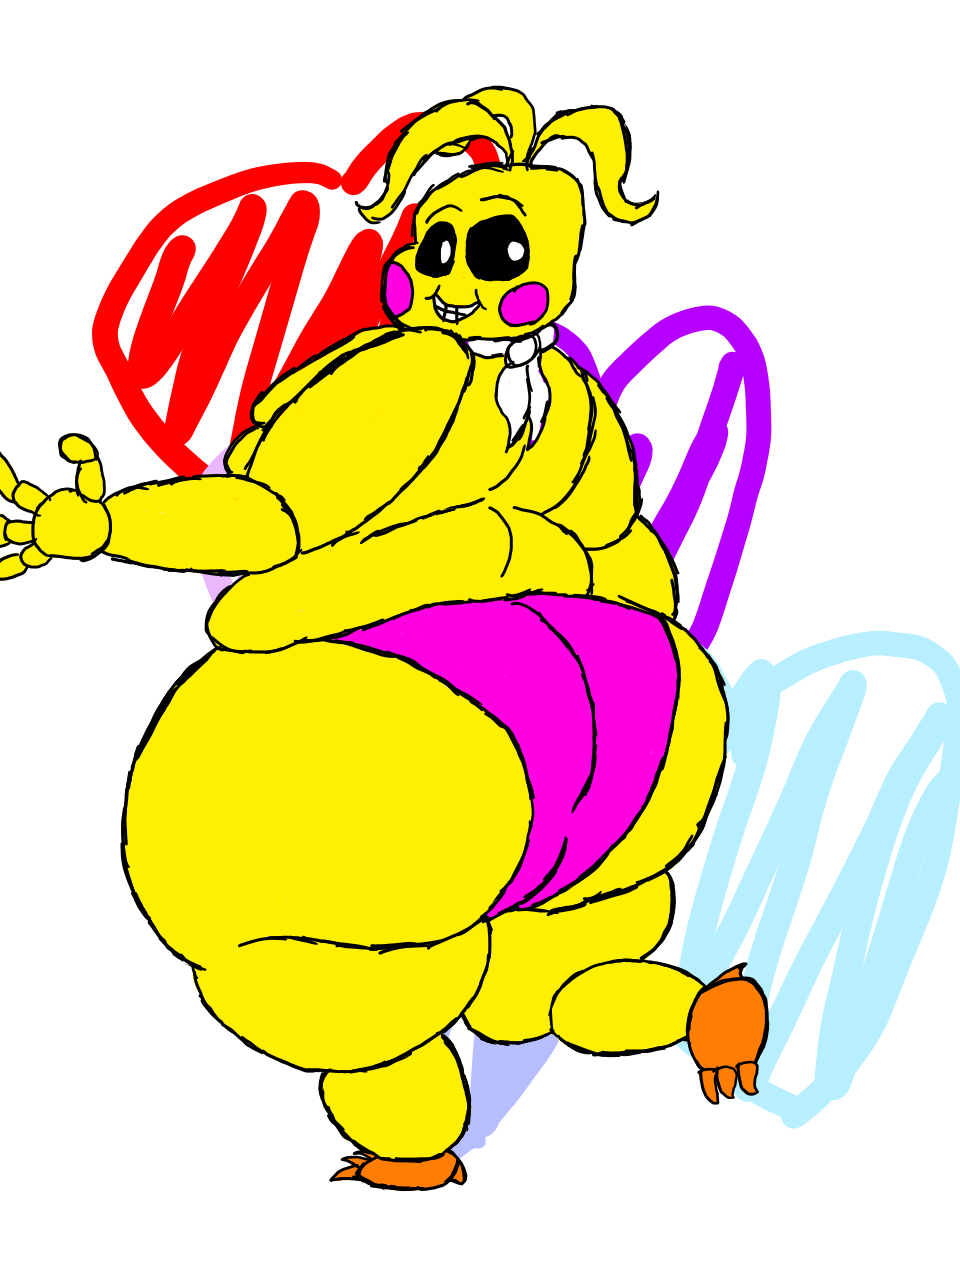 Chubby Toy Chica color - ART BY JOE-ANTHRO. 